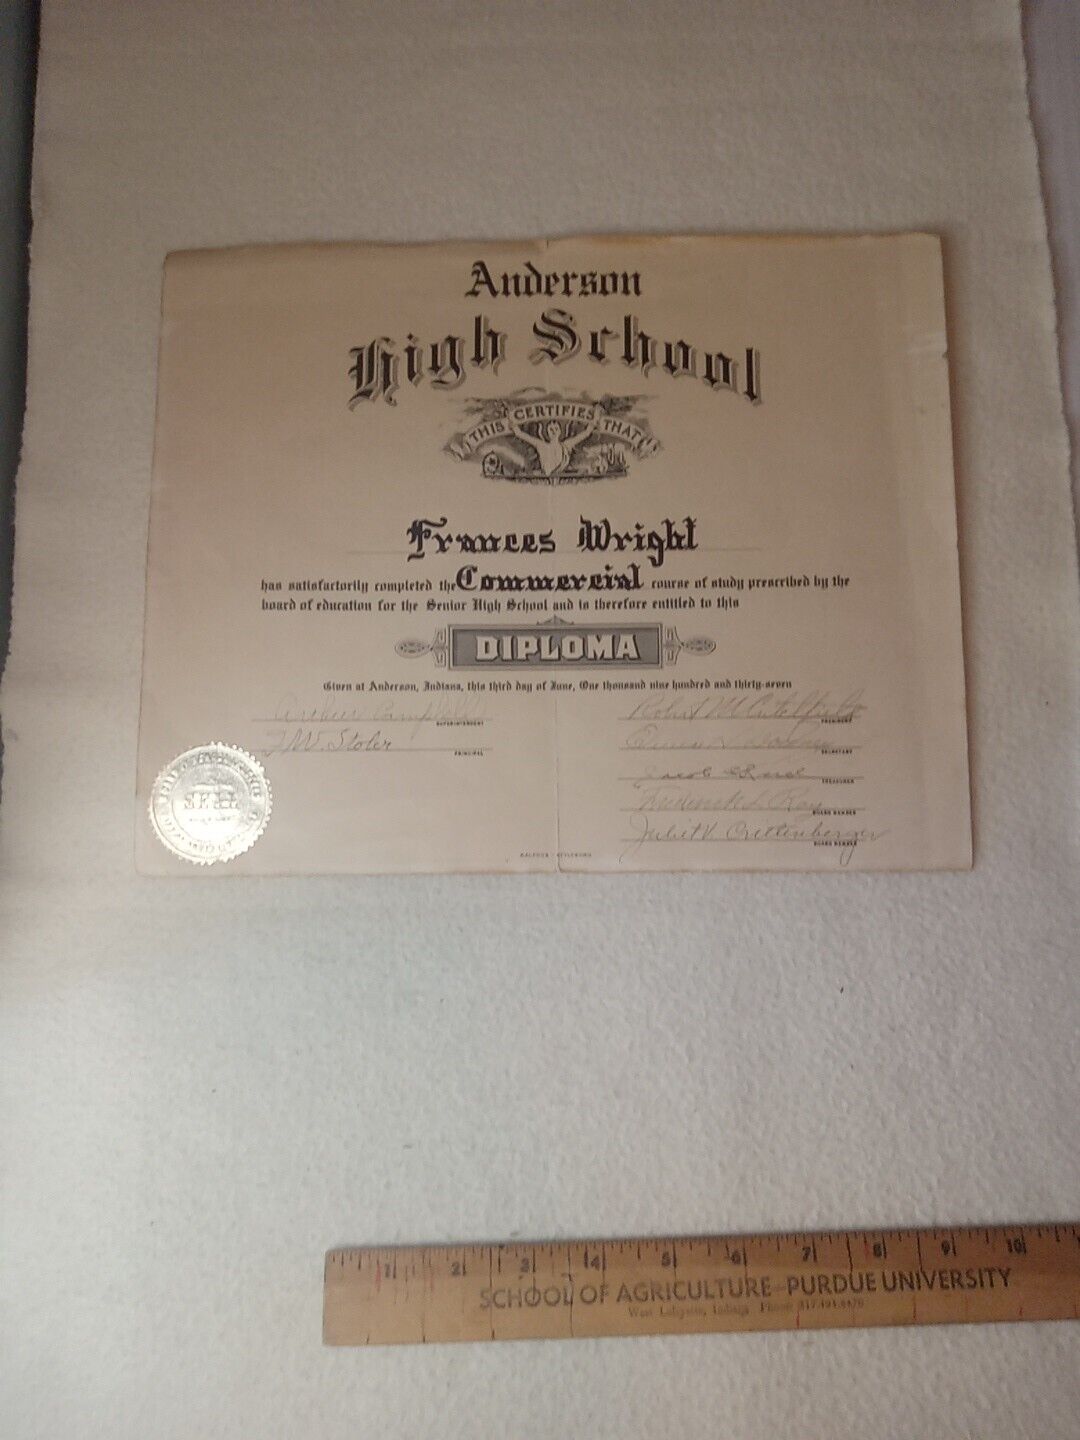 Vintage 1937 ANDERSON IN High School Diploma In Good Condition Collectible